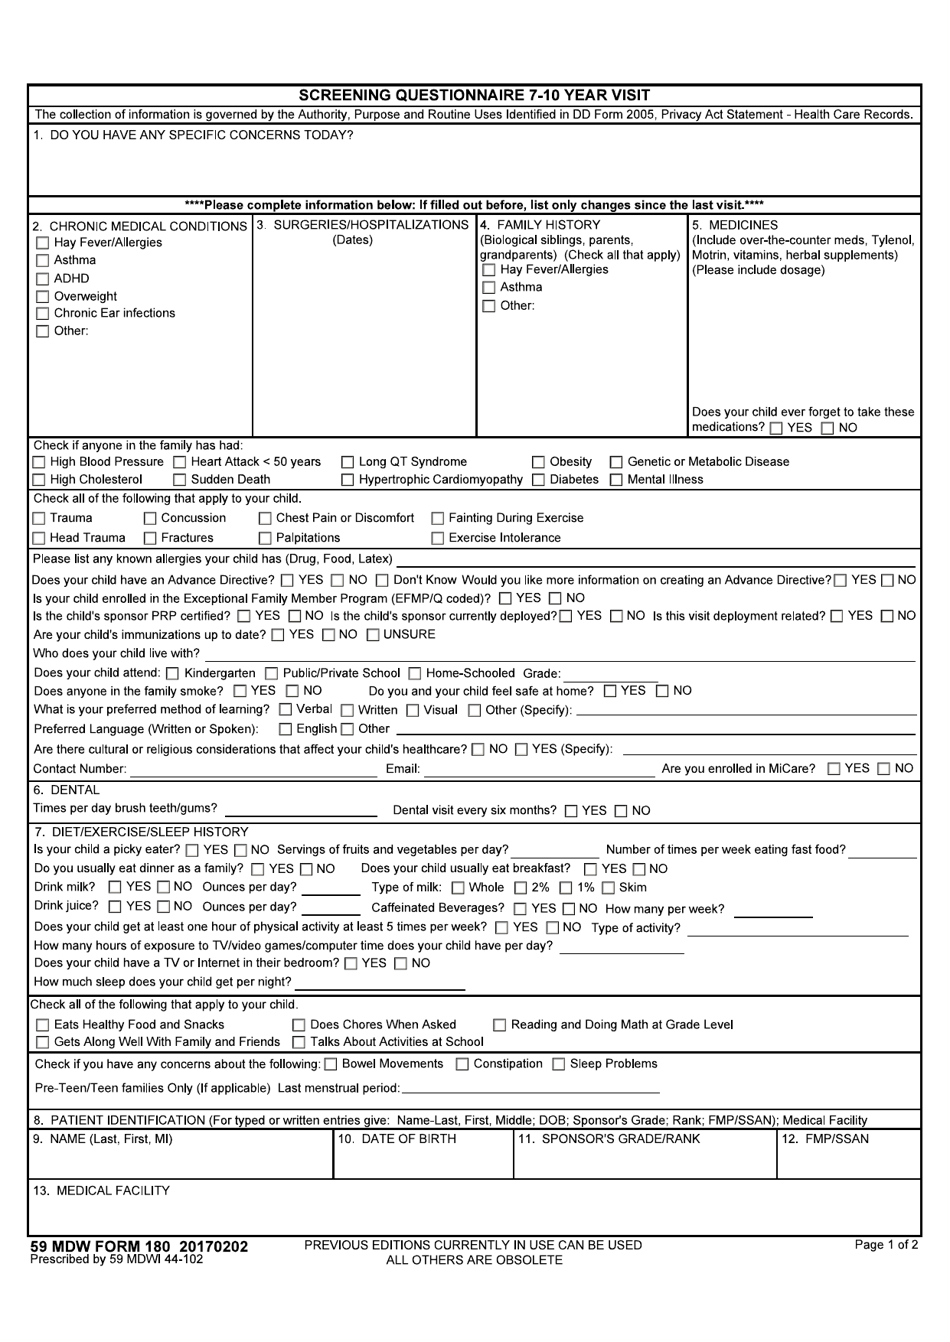 59 MDW Form 180 Screening Questionnaire 6-11 Year Visit, Page 1